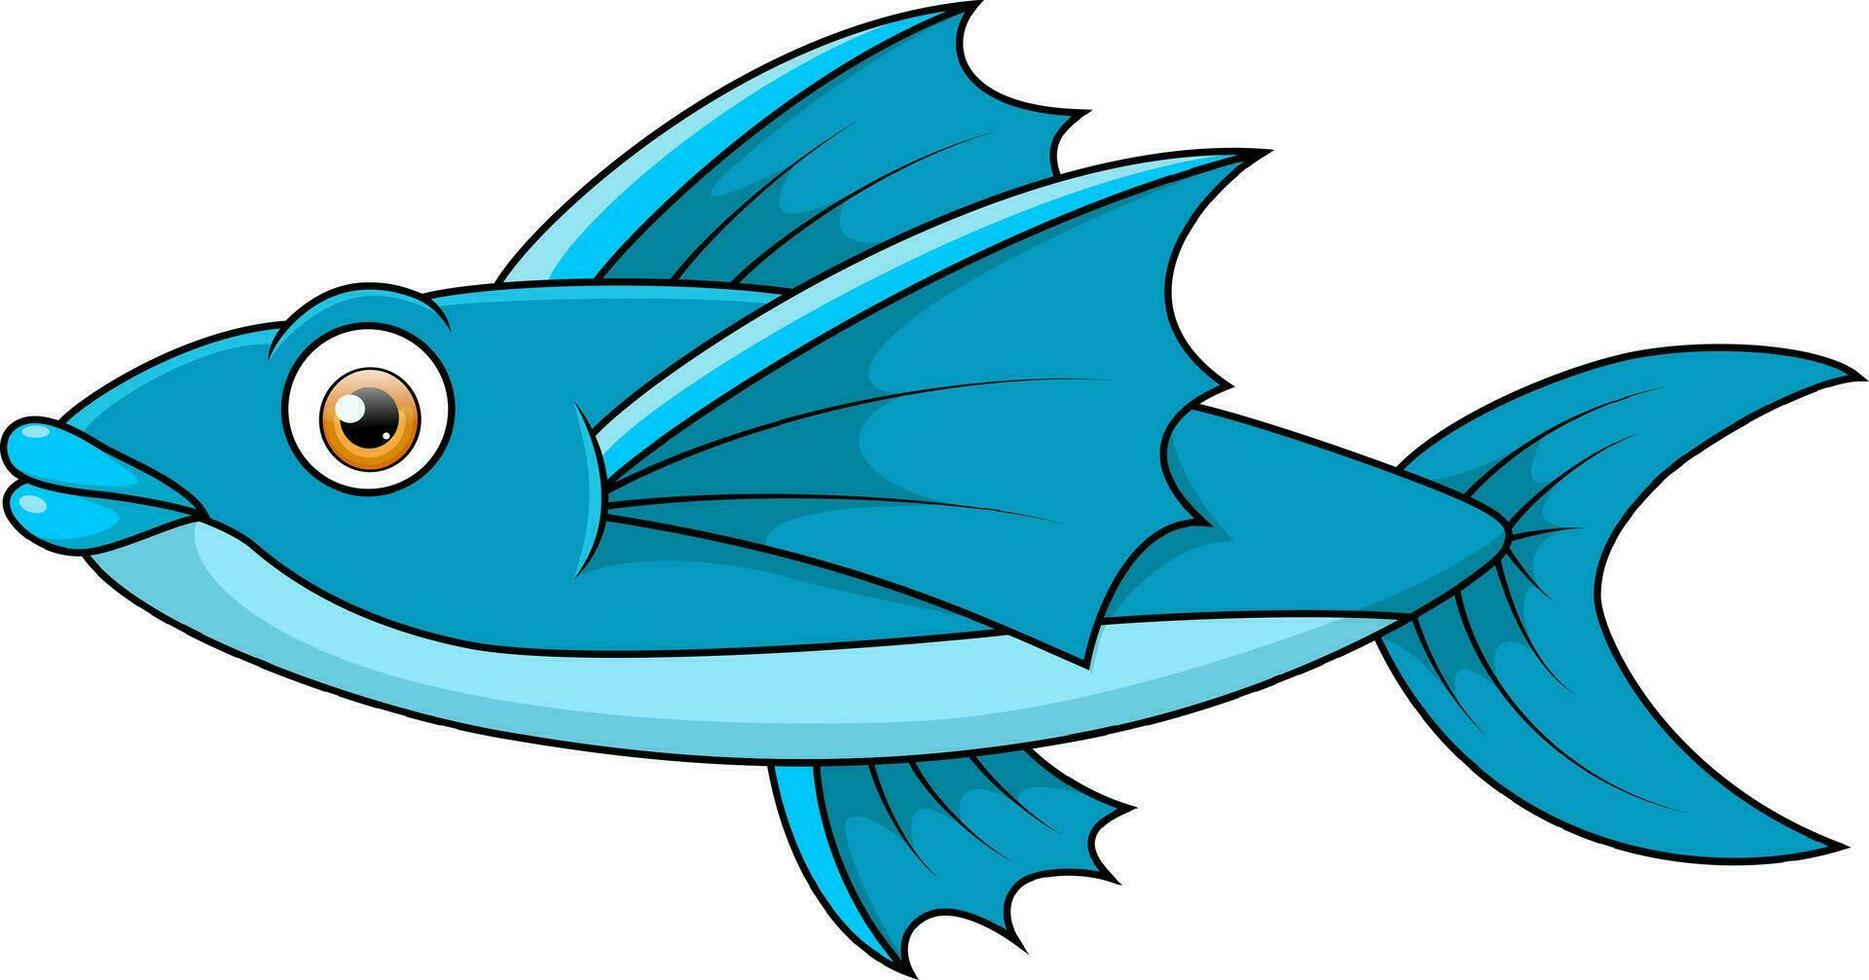 https://static.vecteezy.com/system/resources/previews/028/237/782/non_2x/cute-flying-fish-cartoon-on-white-background-vector.jpg